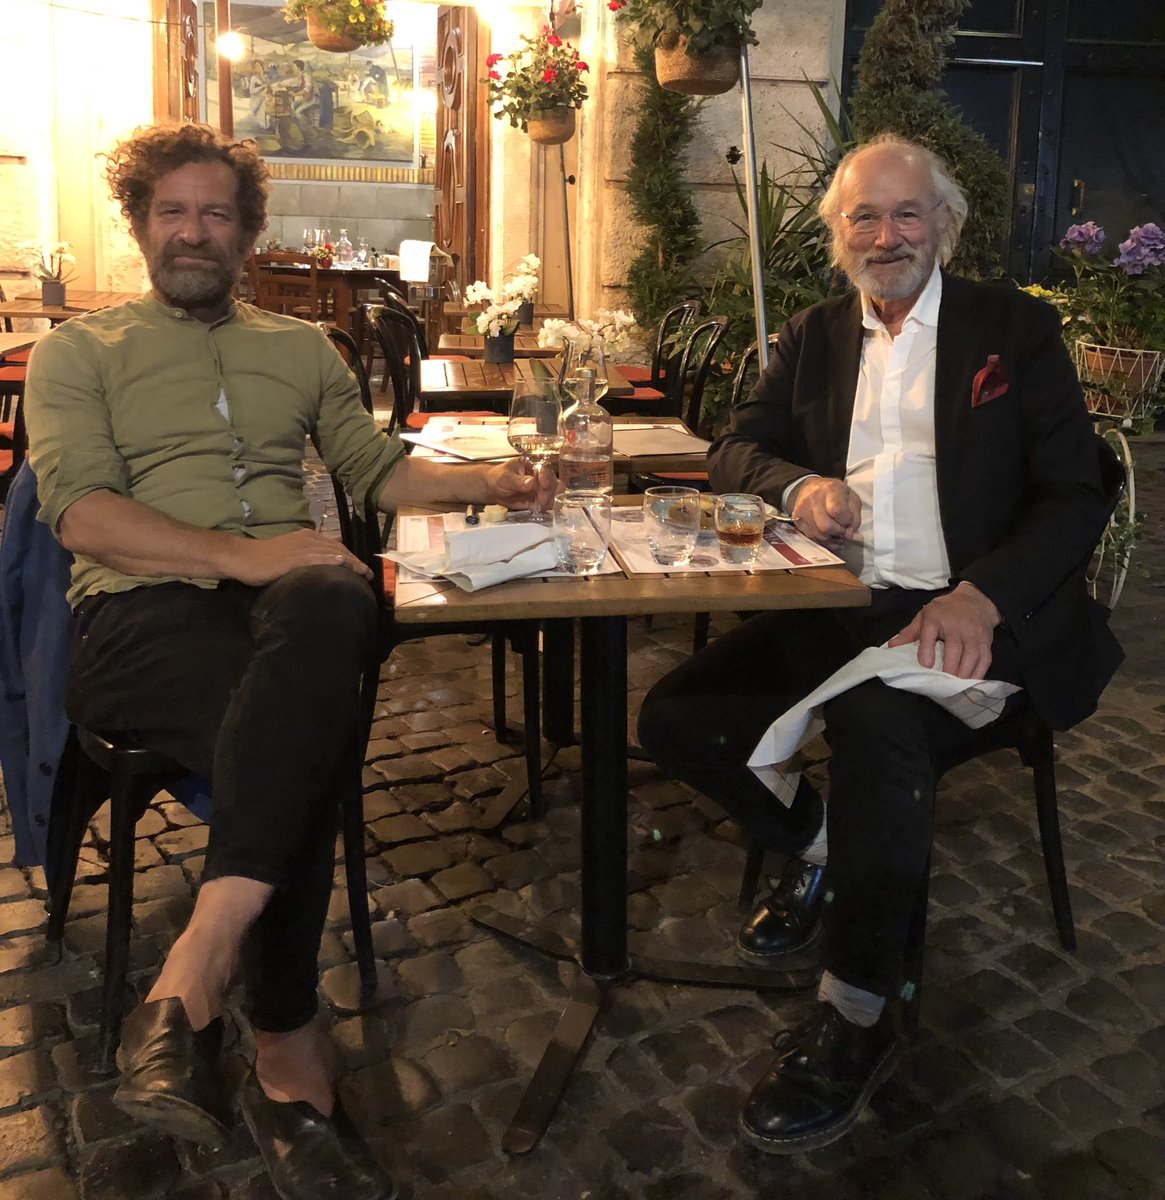 Last night in Rome I had dinner with a special Friend. This man is a mountain of ethics, intellect and strength. John is travelling the world to free his son Julian. #freeassange